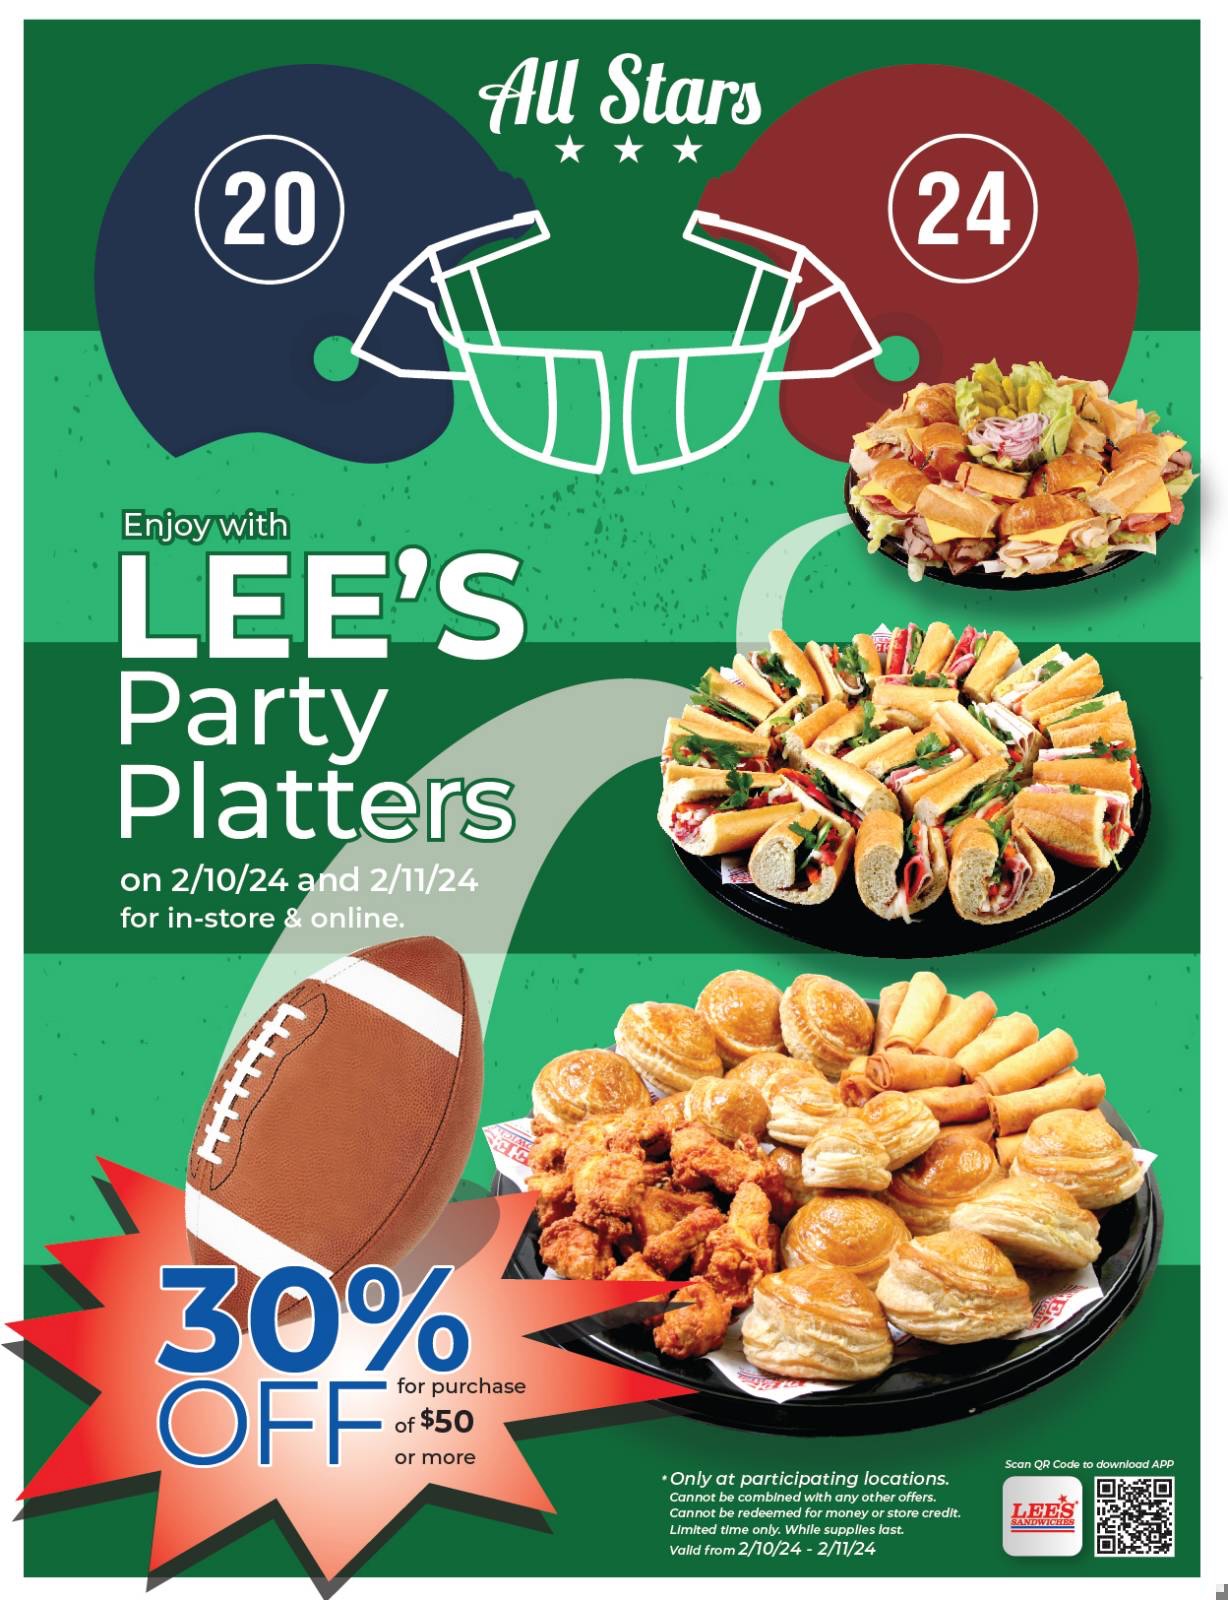 Enjoy SuperBowl with our 30% OFF Party Platters from 2/10-2/11/2024